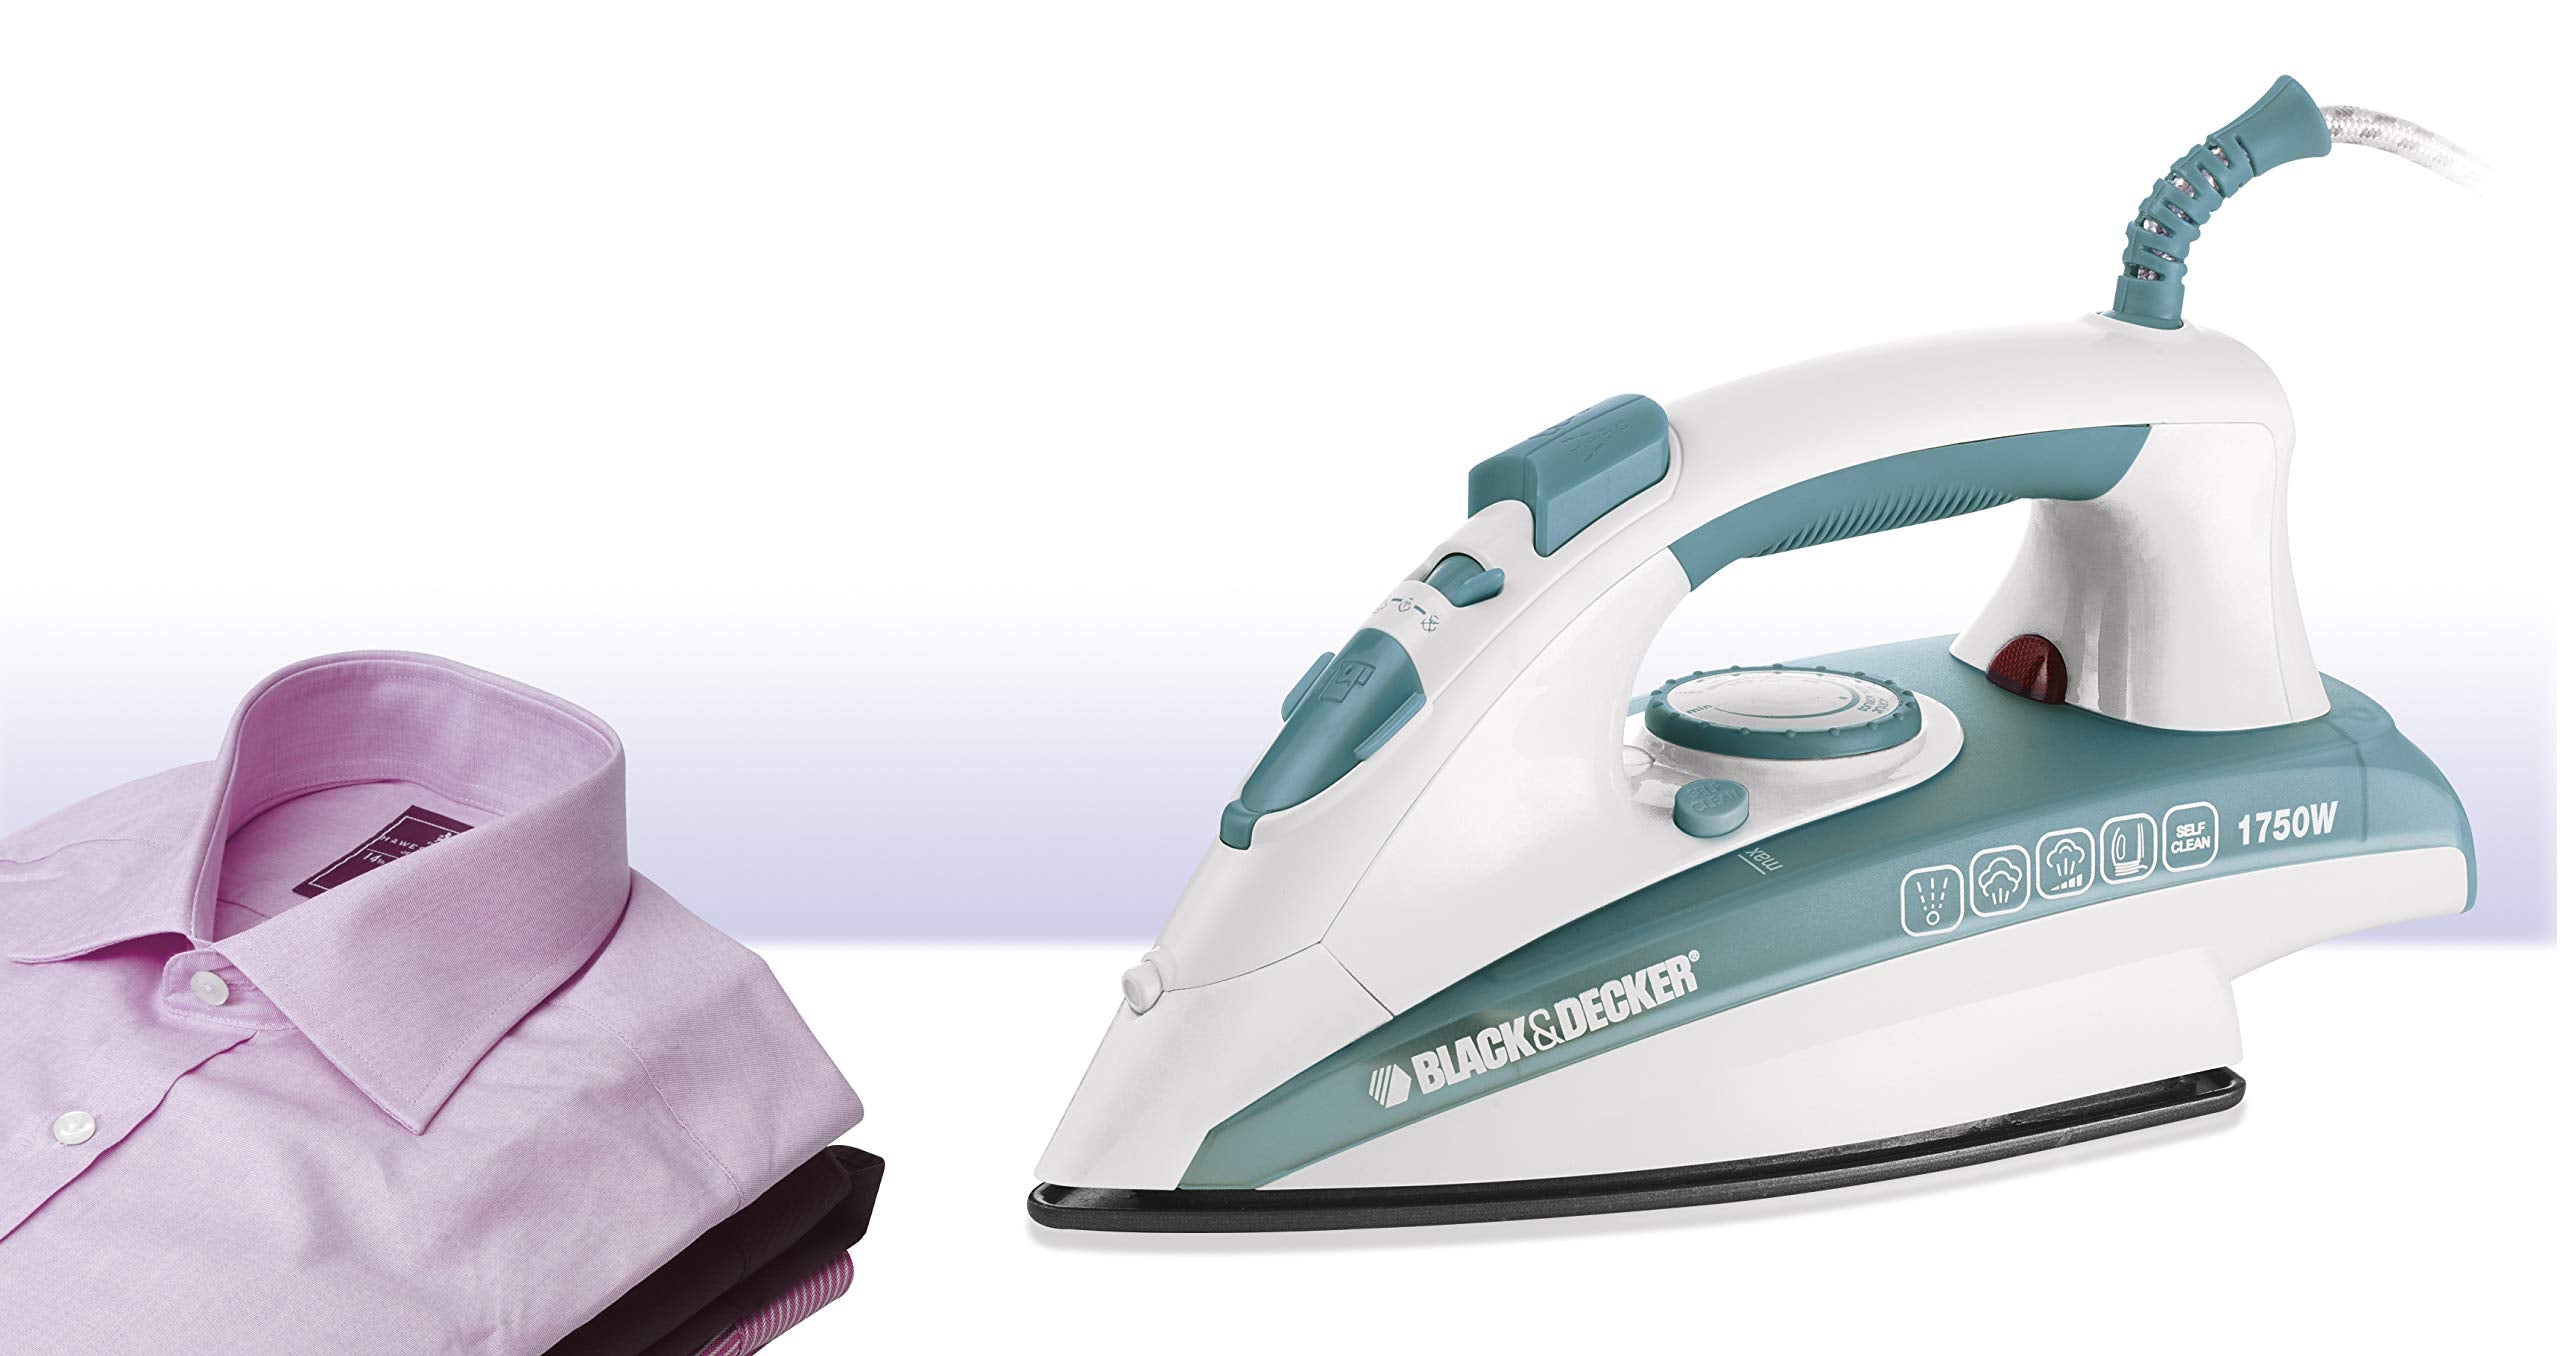 Black & Decker 1750W Steam Iron Ceramic Coated Soleplate with Anti Calc Drip Self Clean and Auto Shutoff, Removes Stubborn Creases Quickly Easily X1600-B5